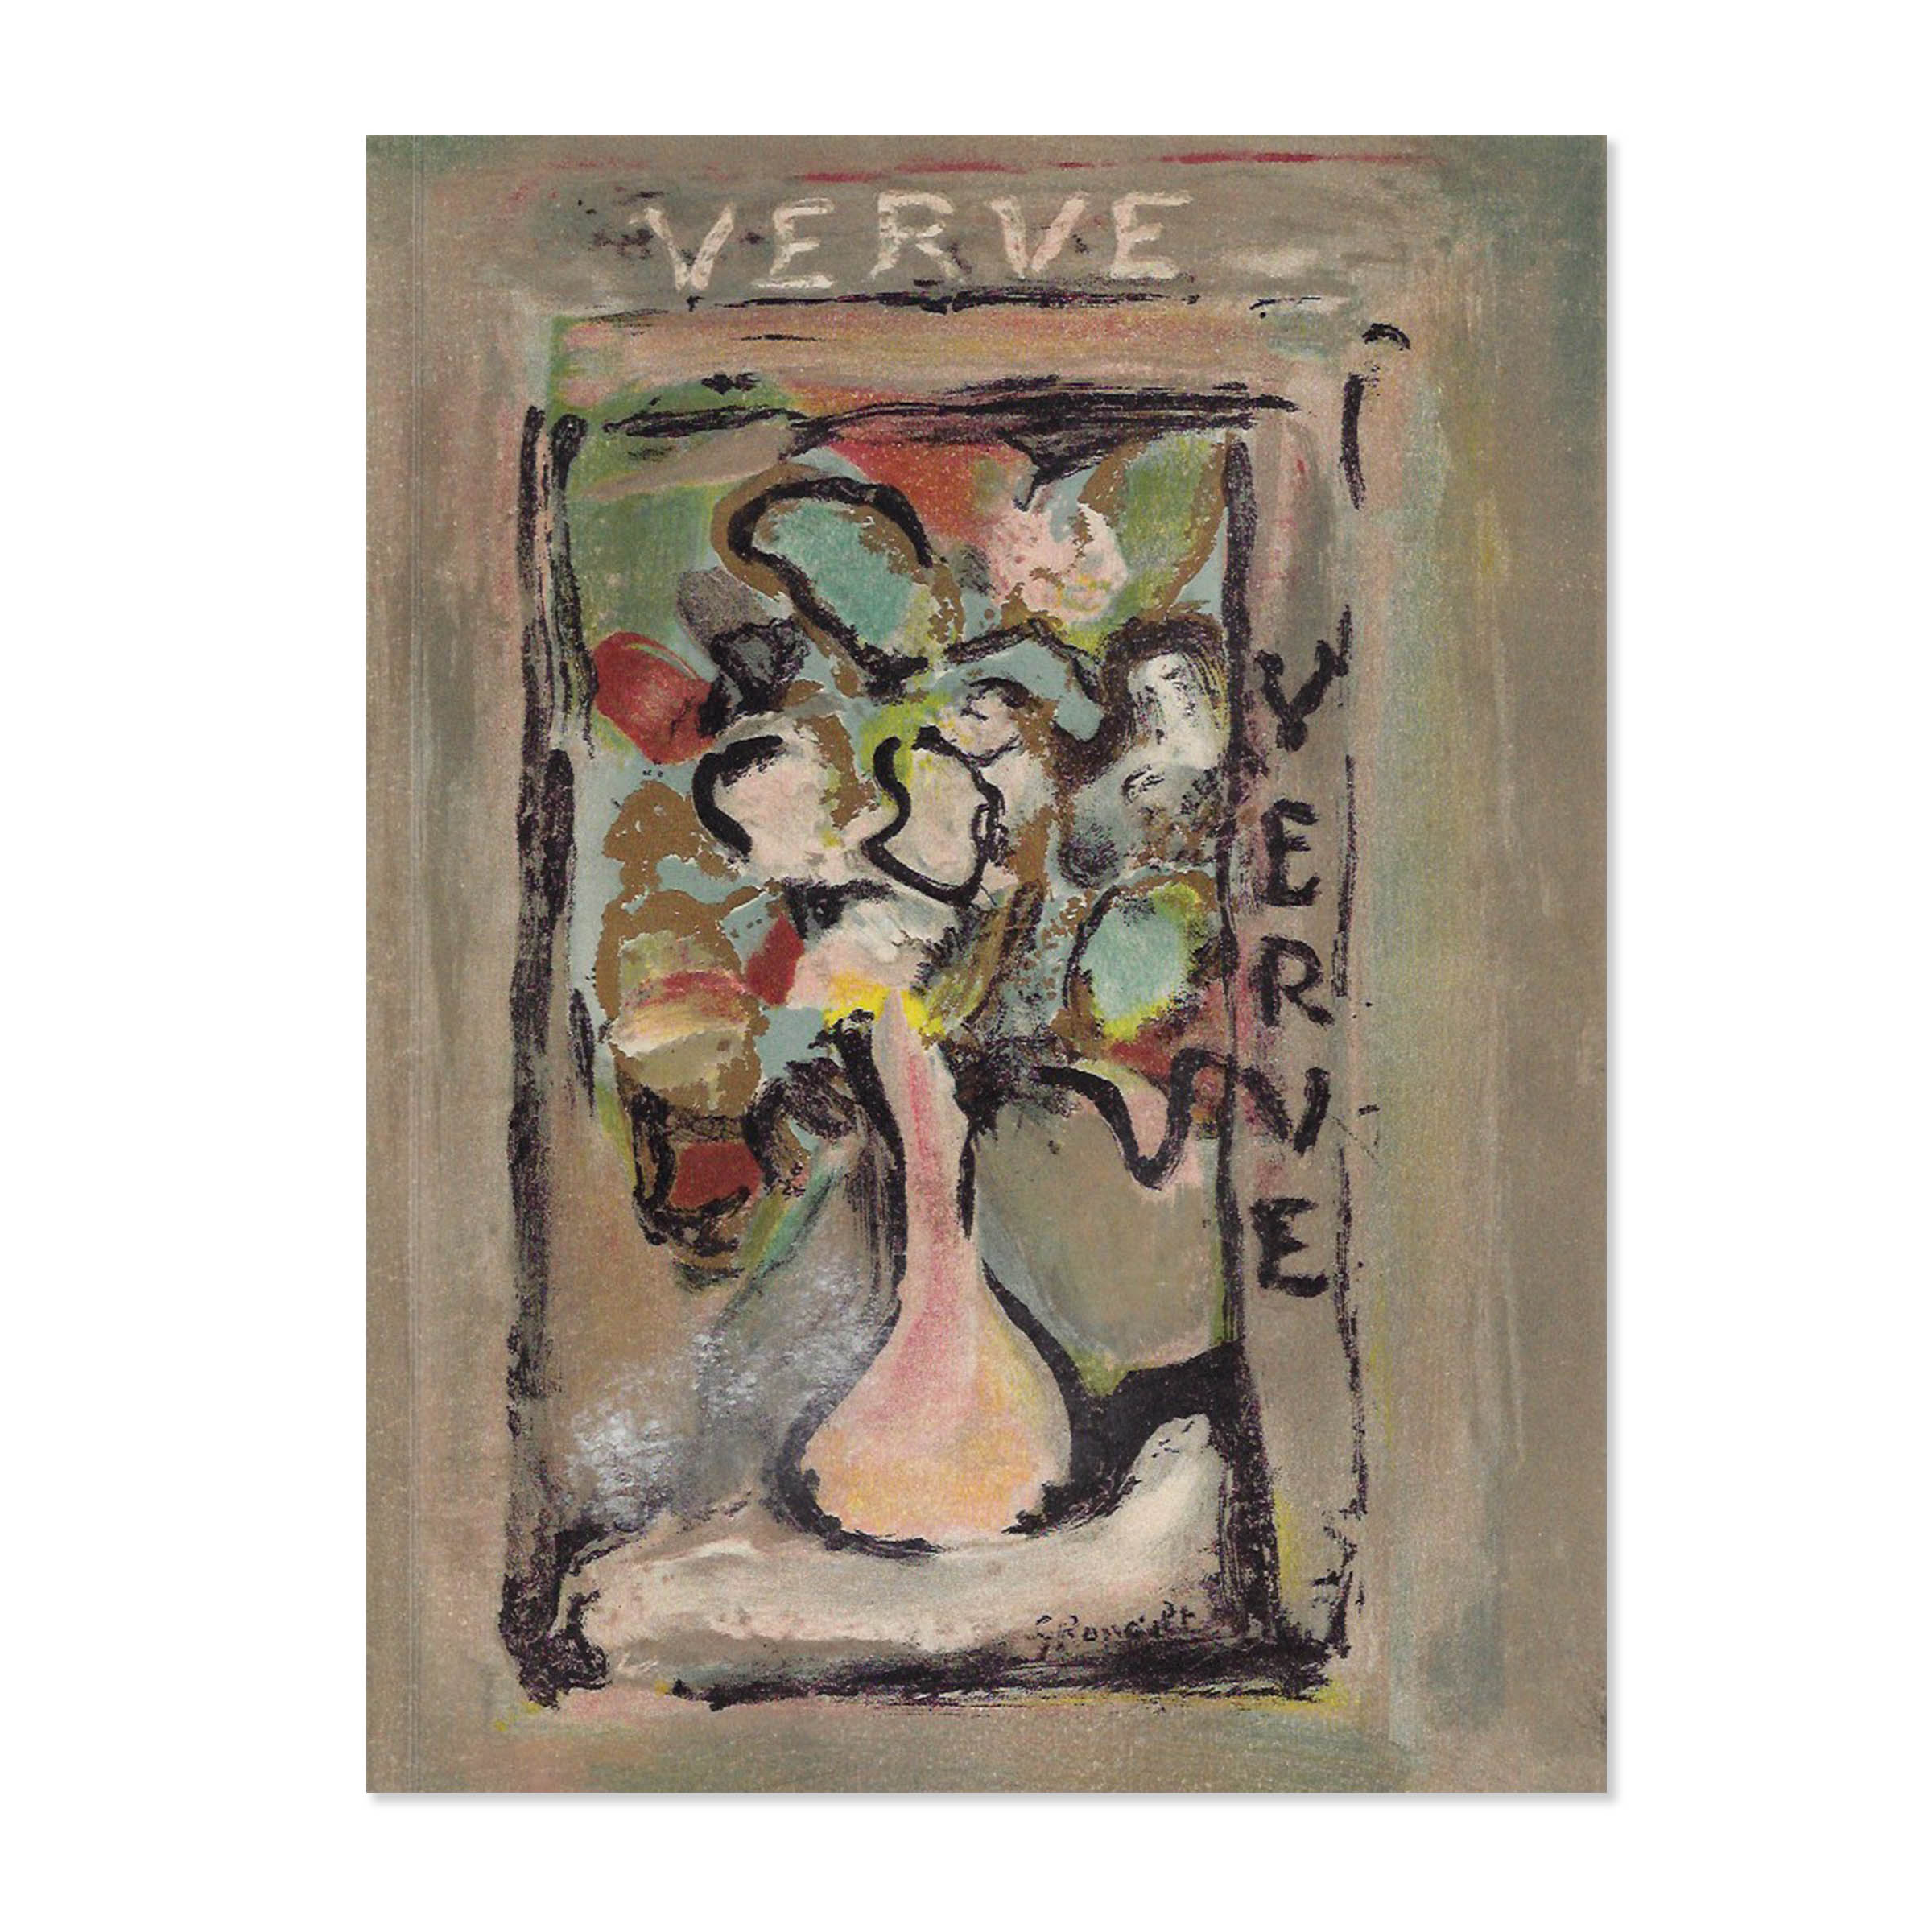 Verve n°4. Cover view recto